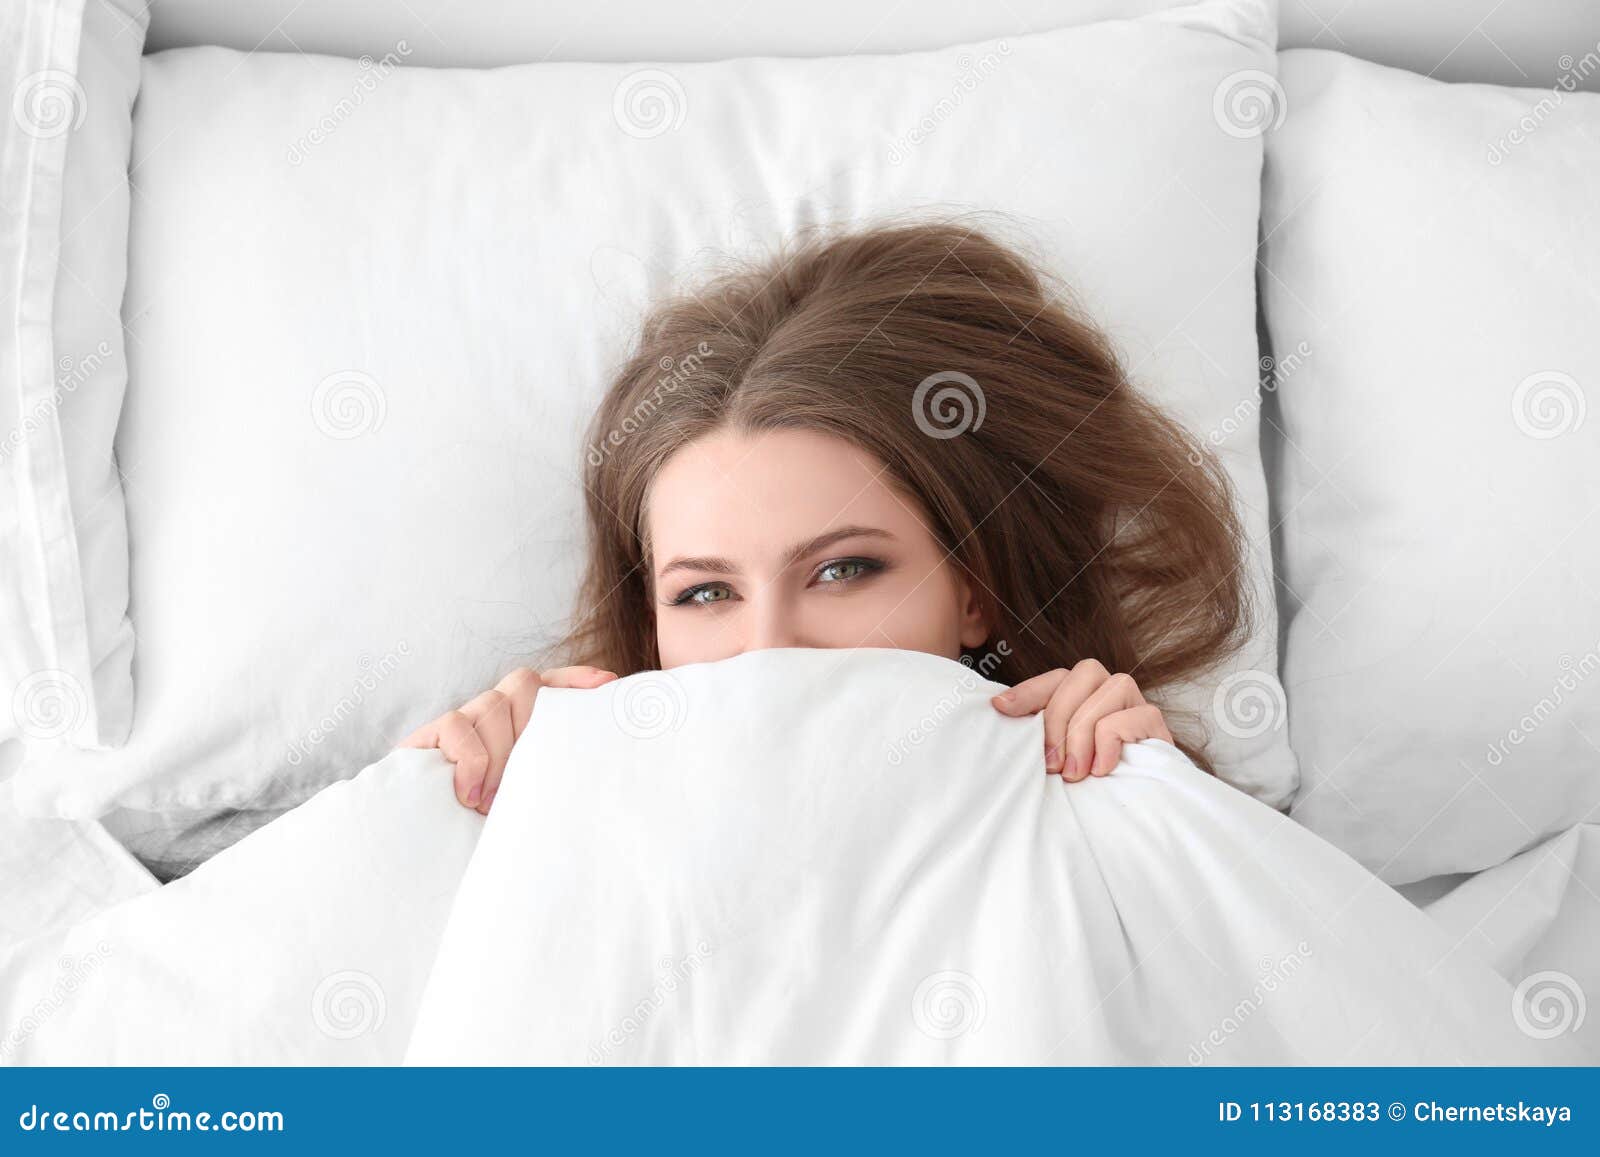 Beautiful Woman Hiding Face Under Blanket Stock Image Image Of